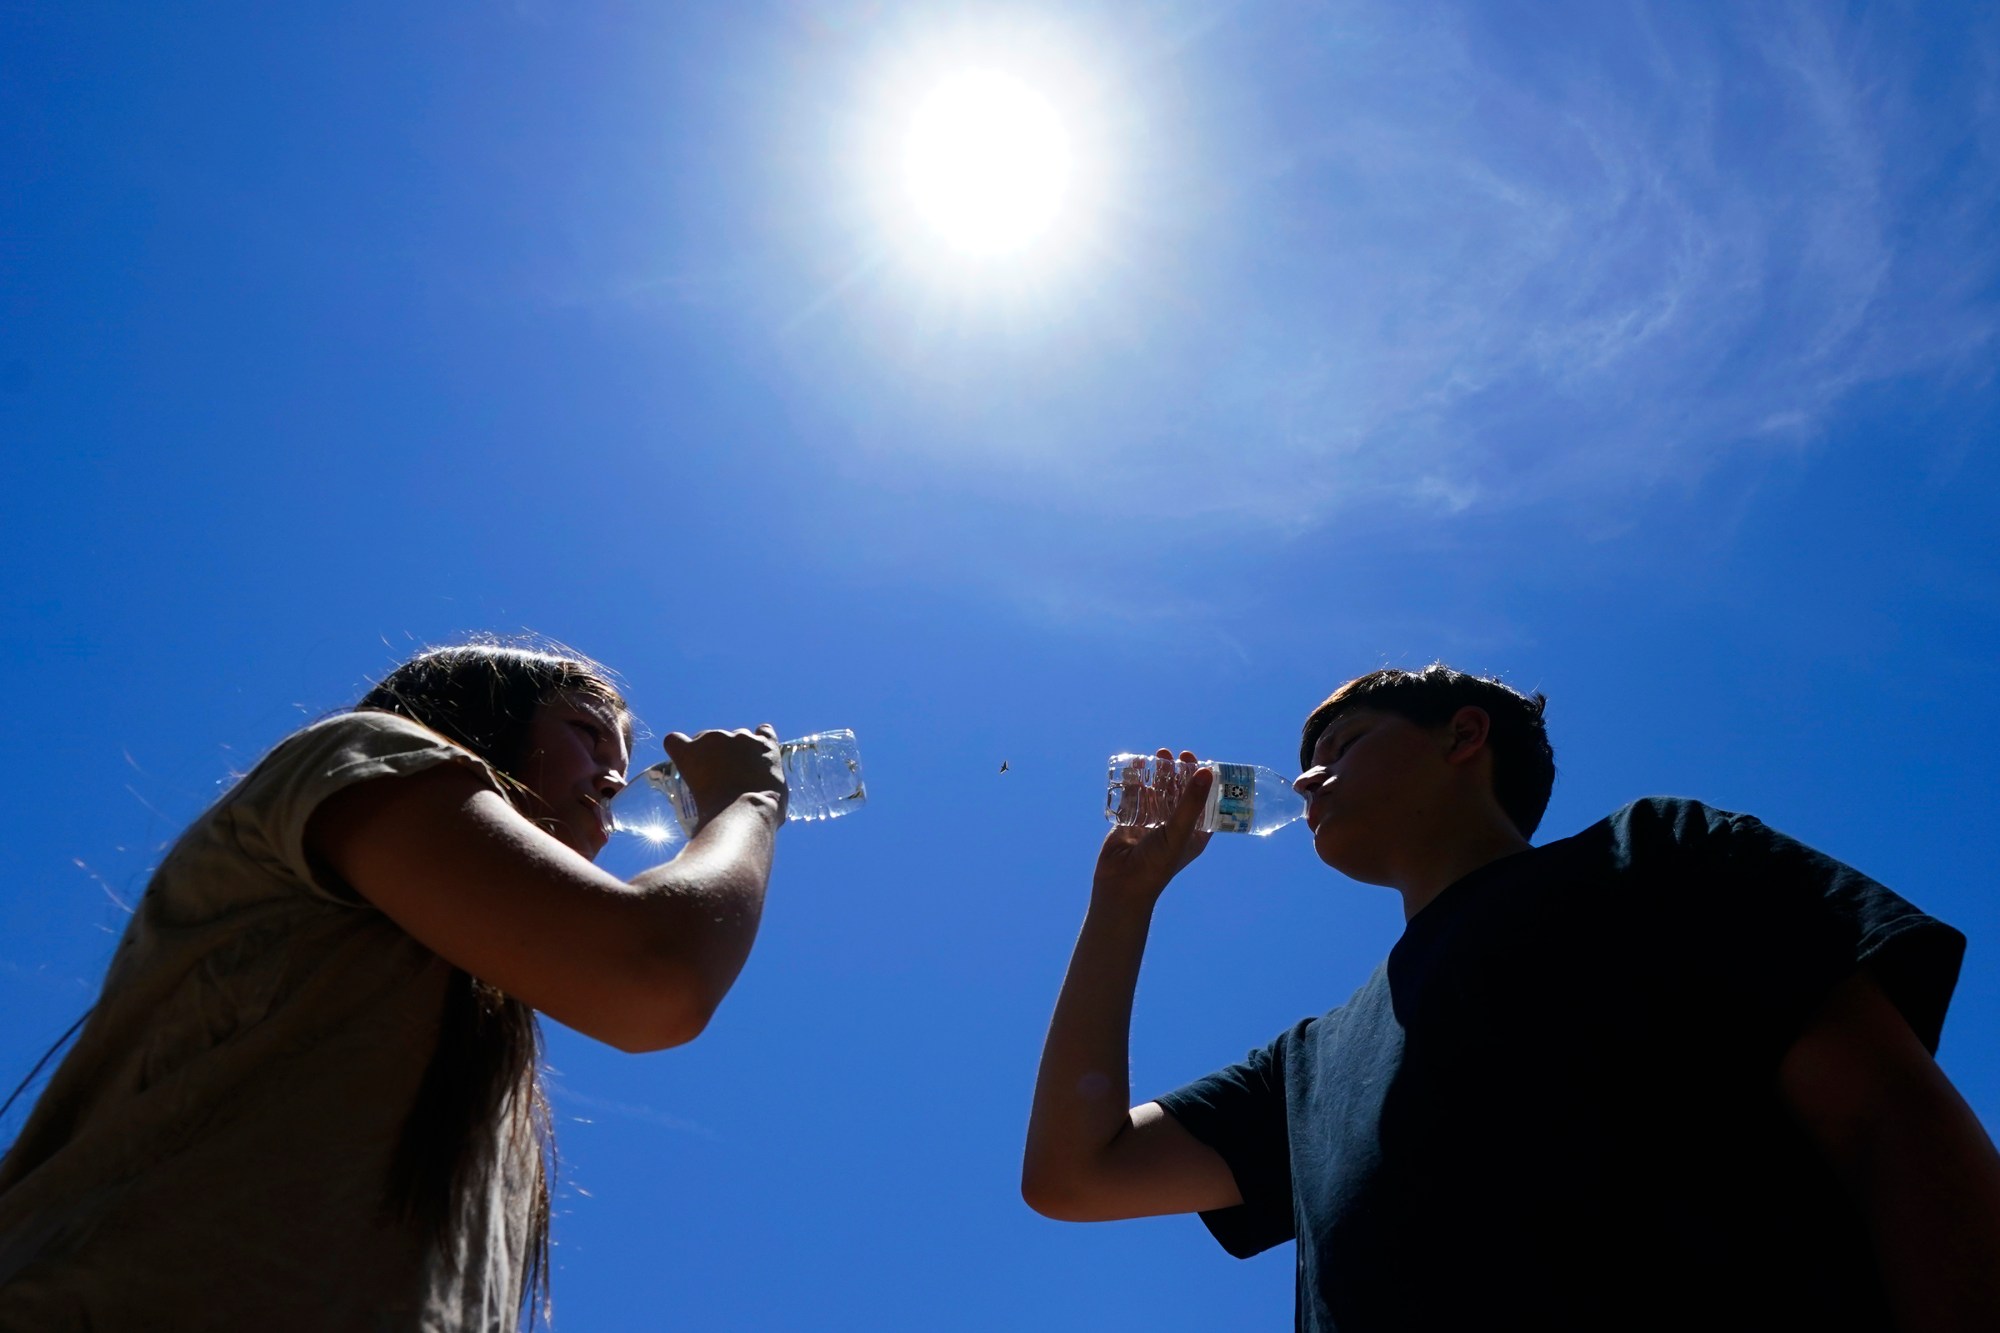 FILE - Tony Berastegui Jr., right, and his sister Giselle Berastegui drink water, Monday, July 17, 2023, in Phoenix. A historic heat wave that turned the Southwest into a blast furnace throughout July is beginning to abate with the late arrival of the monsoon rains. Forecasters expect that by Monday, July 31, at the latest, people in metro Phoenix will begin seeing high temperatures under 110 degrees Fahrenheit (43.3 degrees Celsius) for the first time in a month. (AP Photo/Ross D. Franklin, File)